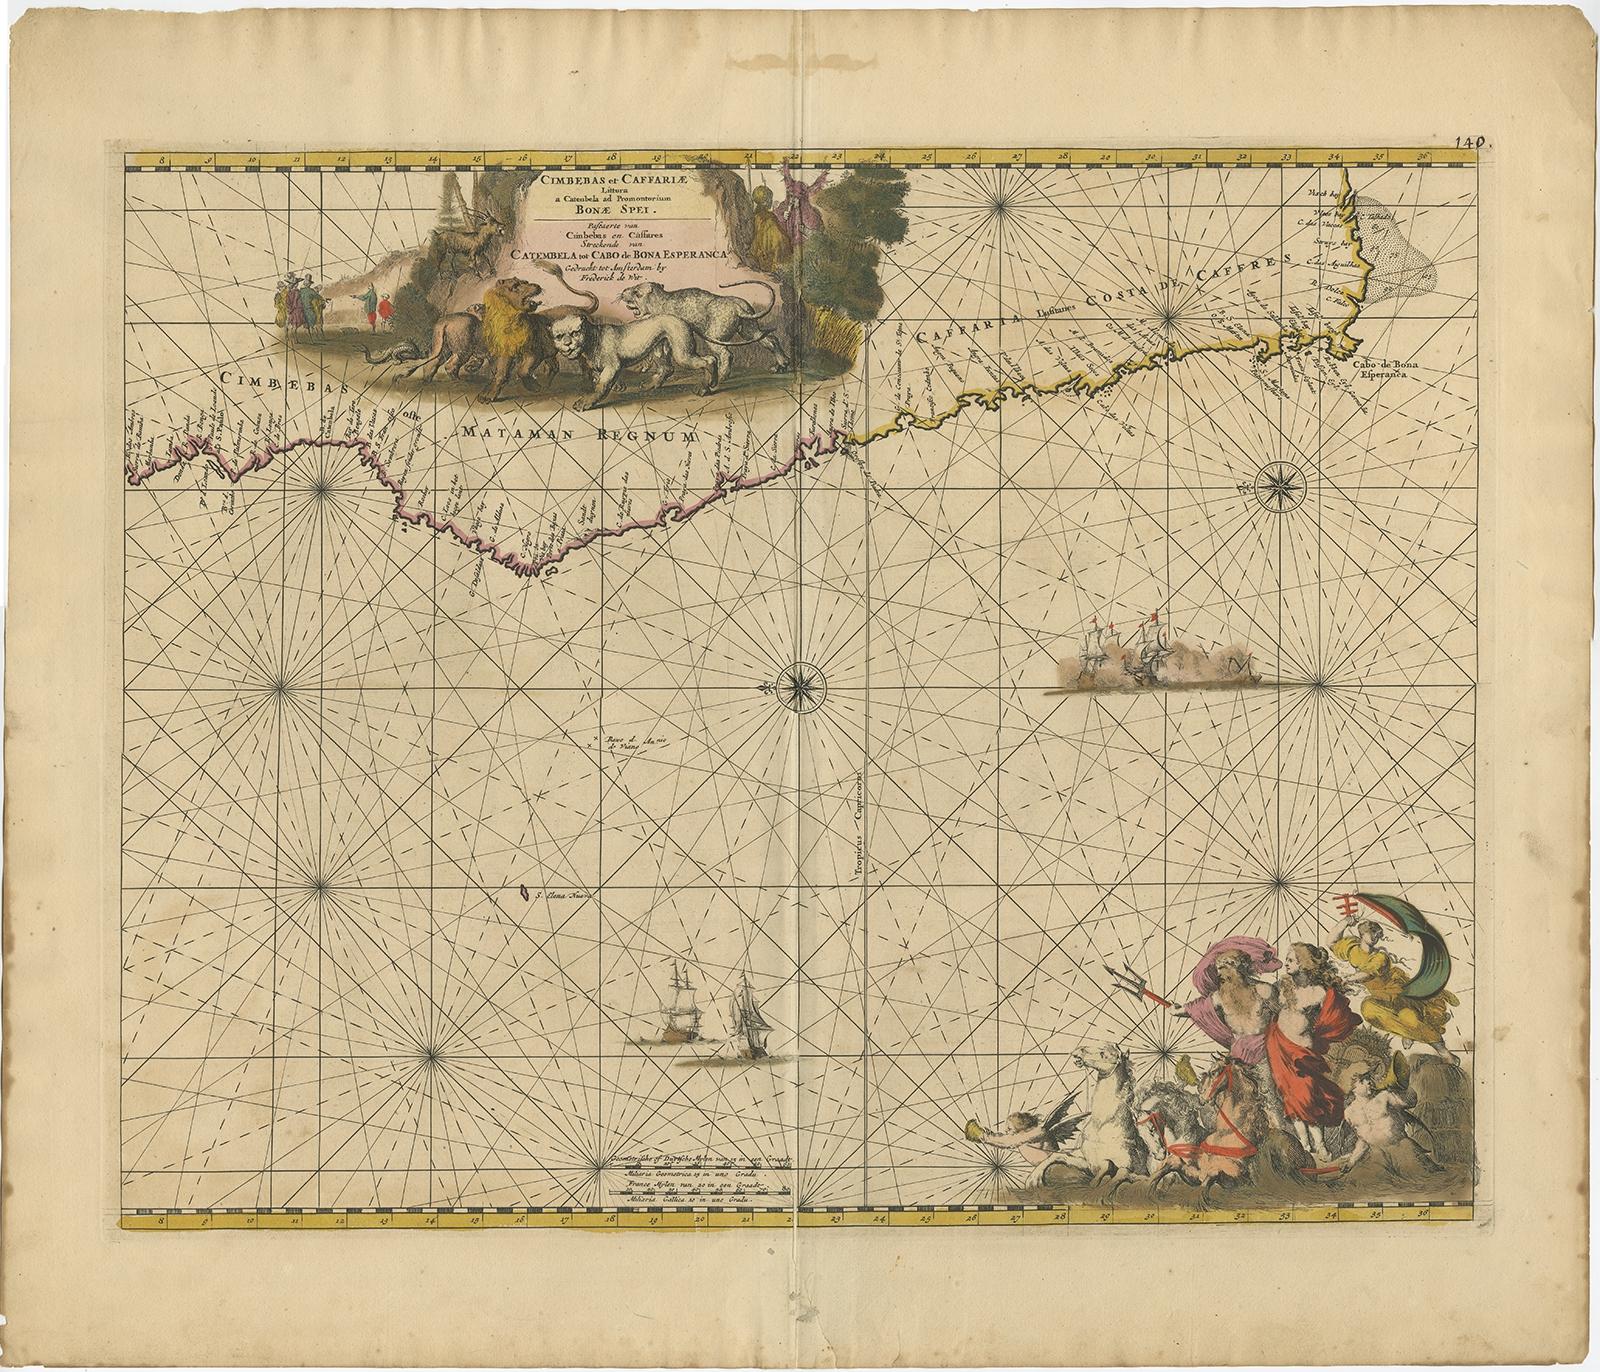 Antique map titled 'Cimbebas et Caffariae Littora a Catenbela ad Promontorium Bonae Spei'. 

This map depicts the coast of Angola, South-West Africa and South Africa up to Port Elizabeth. The southwestern coastline is covered including the Cape of